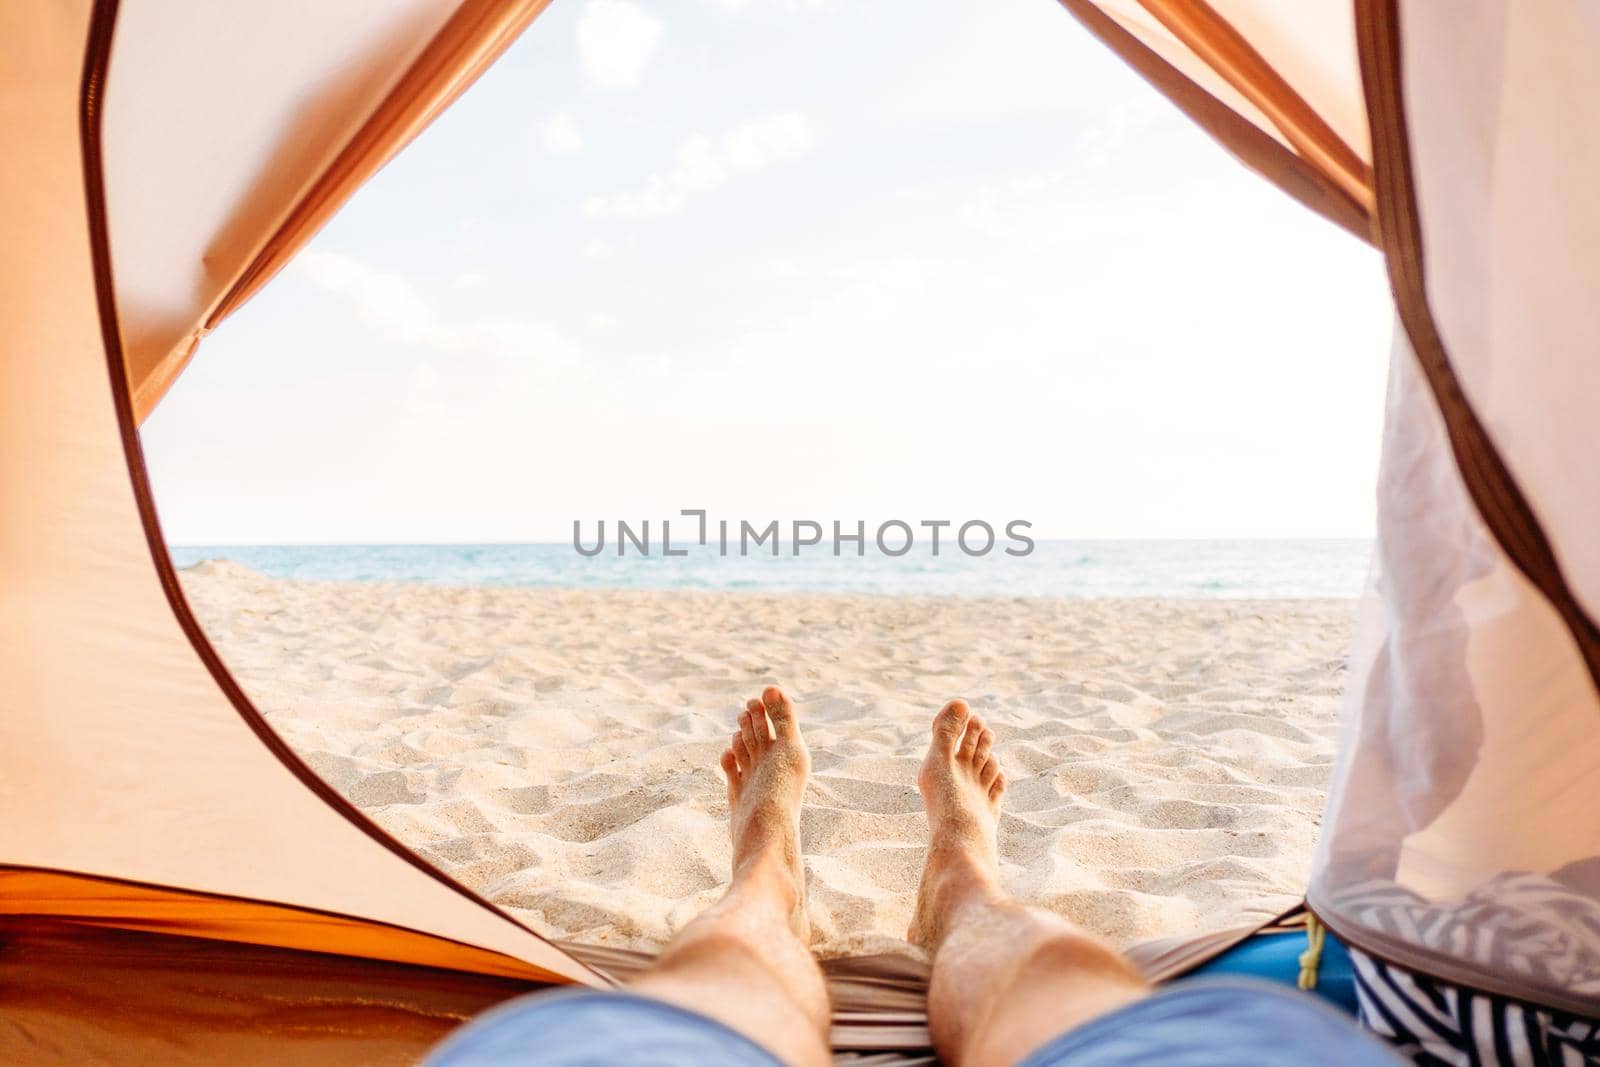 Young man resting in a tent on sand beach near the sea, point of view.